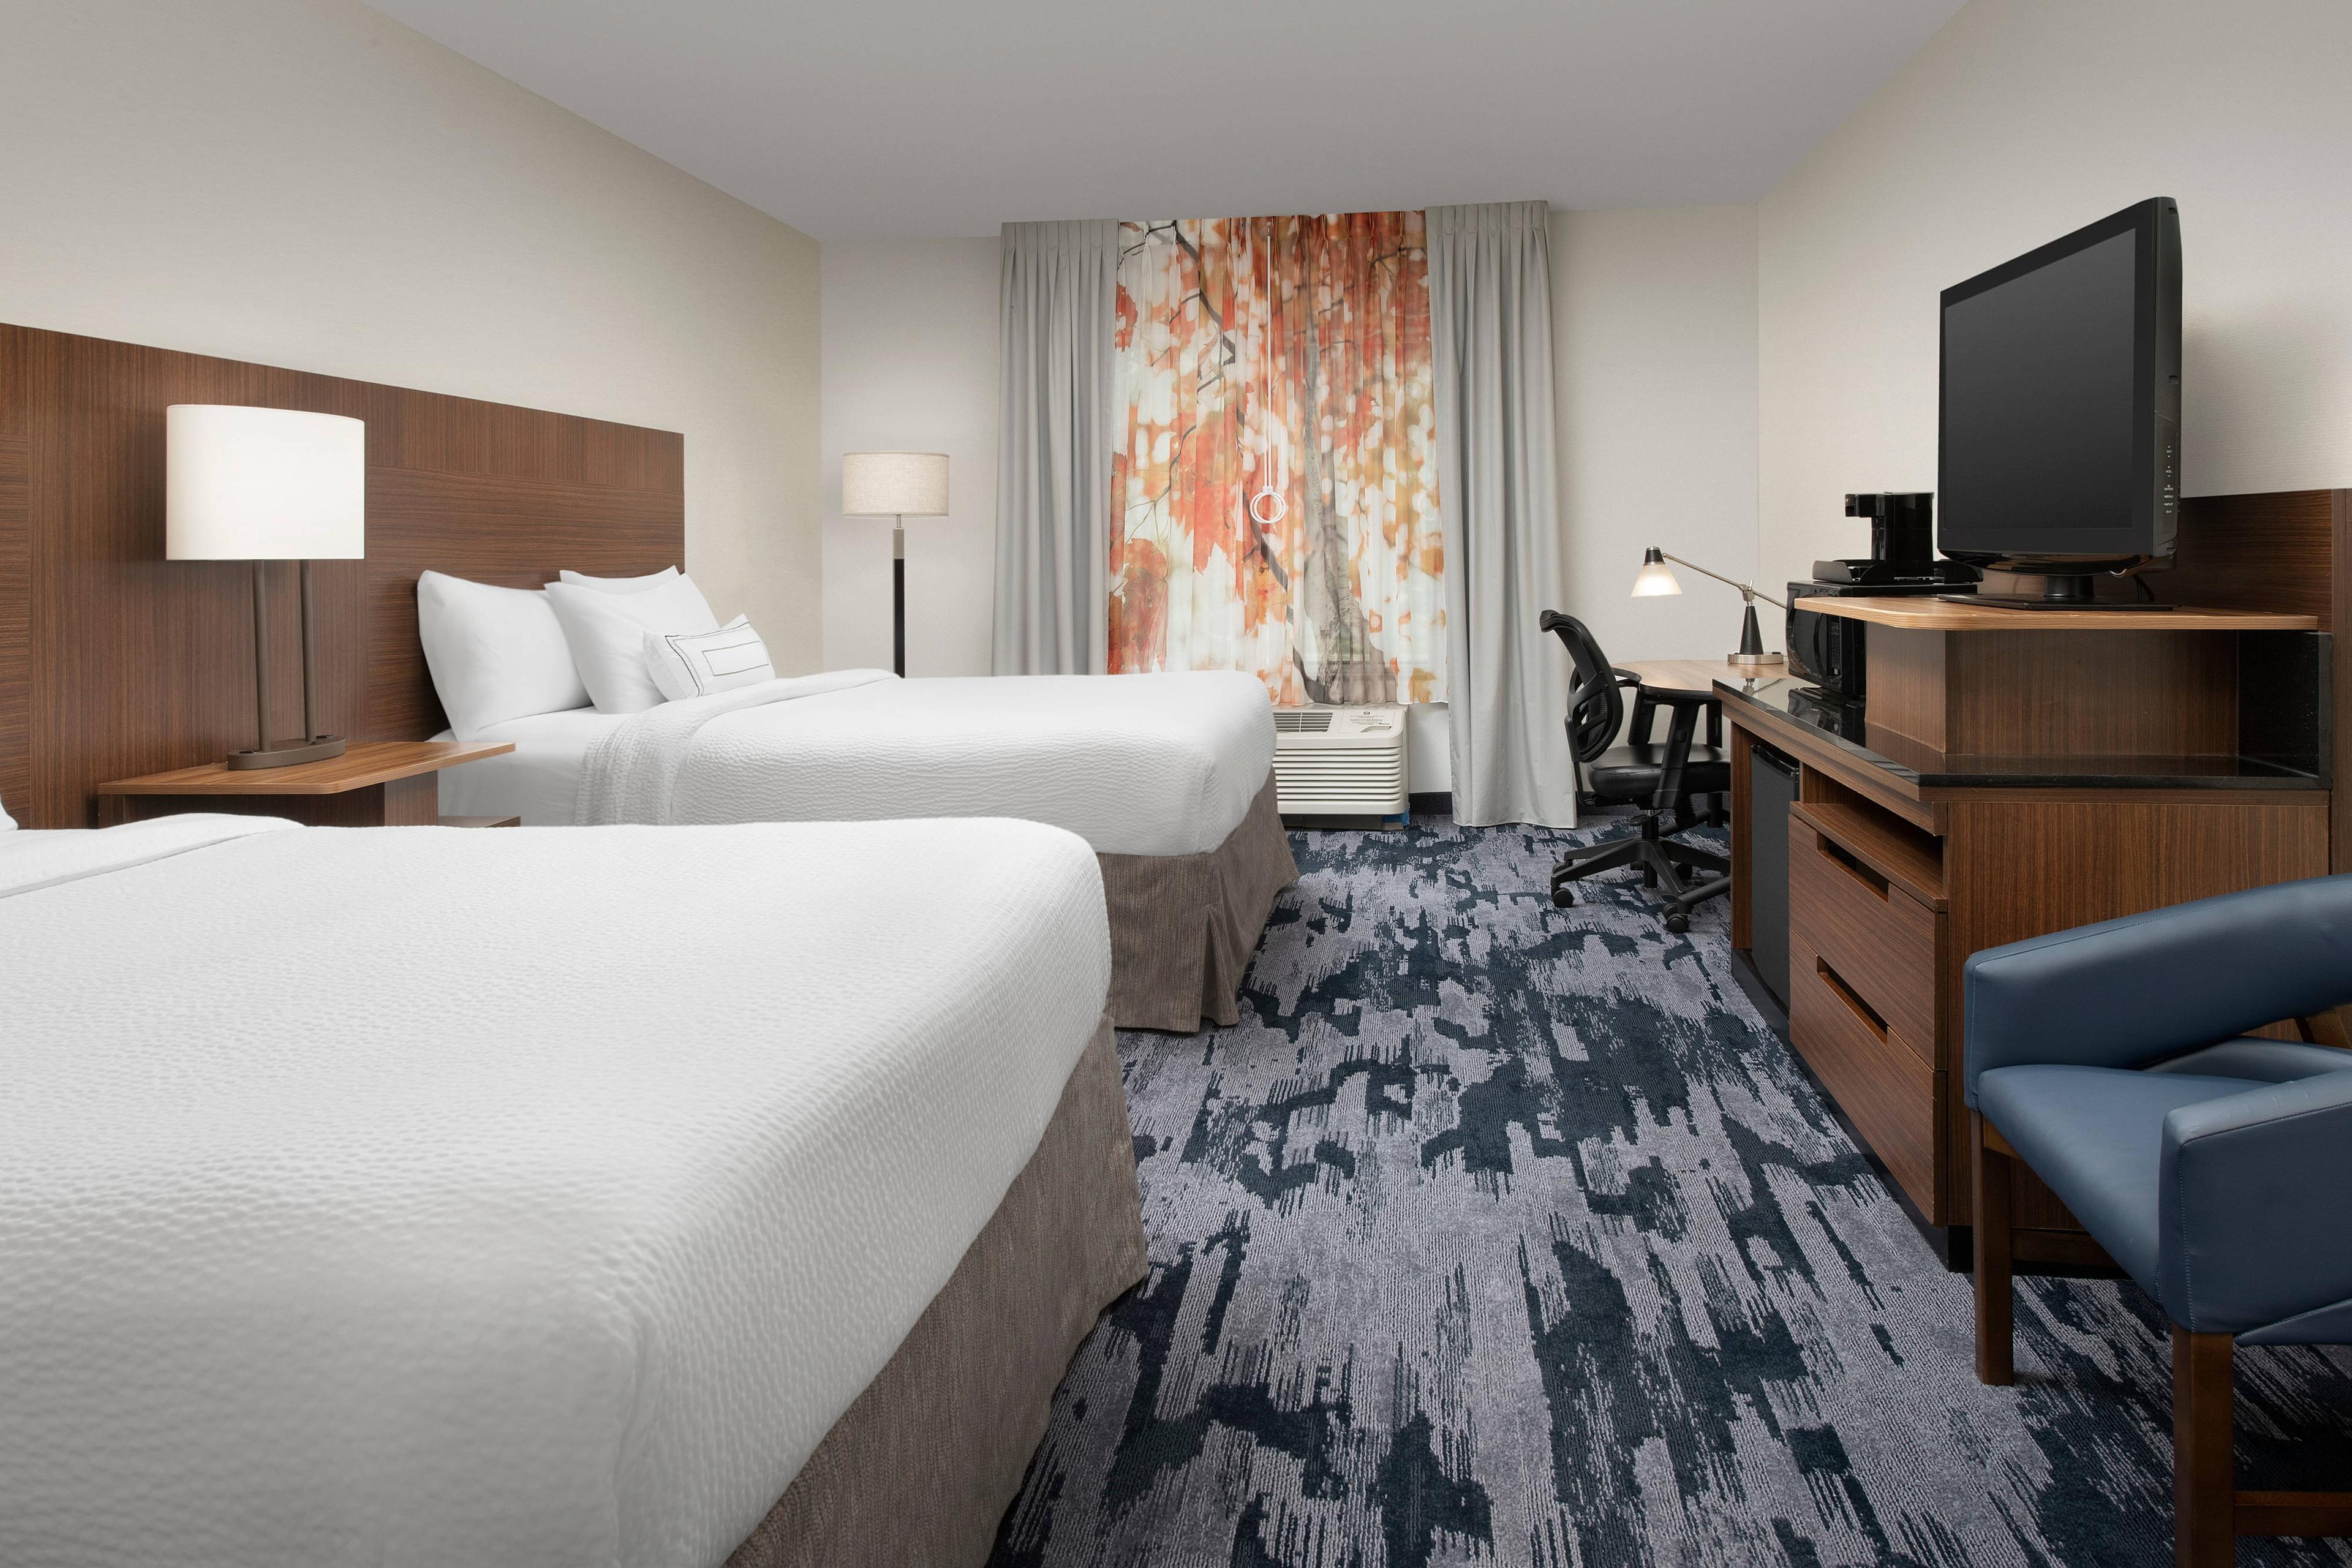 Our accessible guest rooms includes more space and free WiFi for you to spread out.